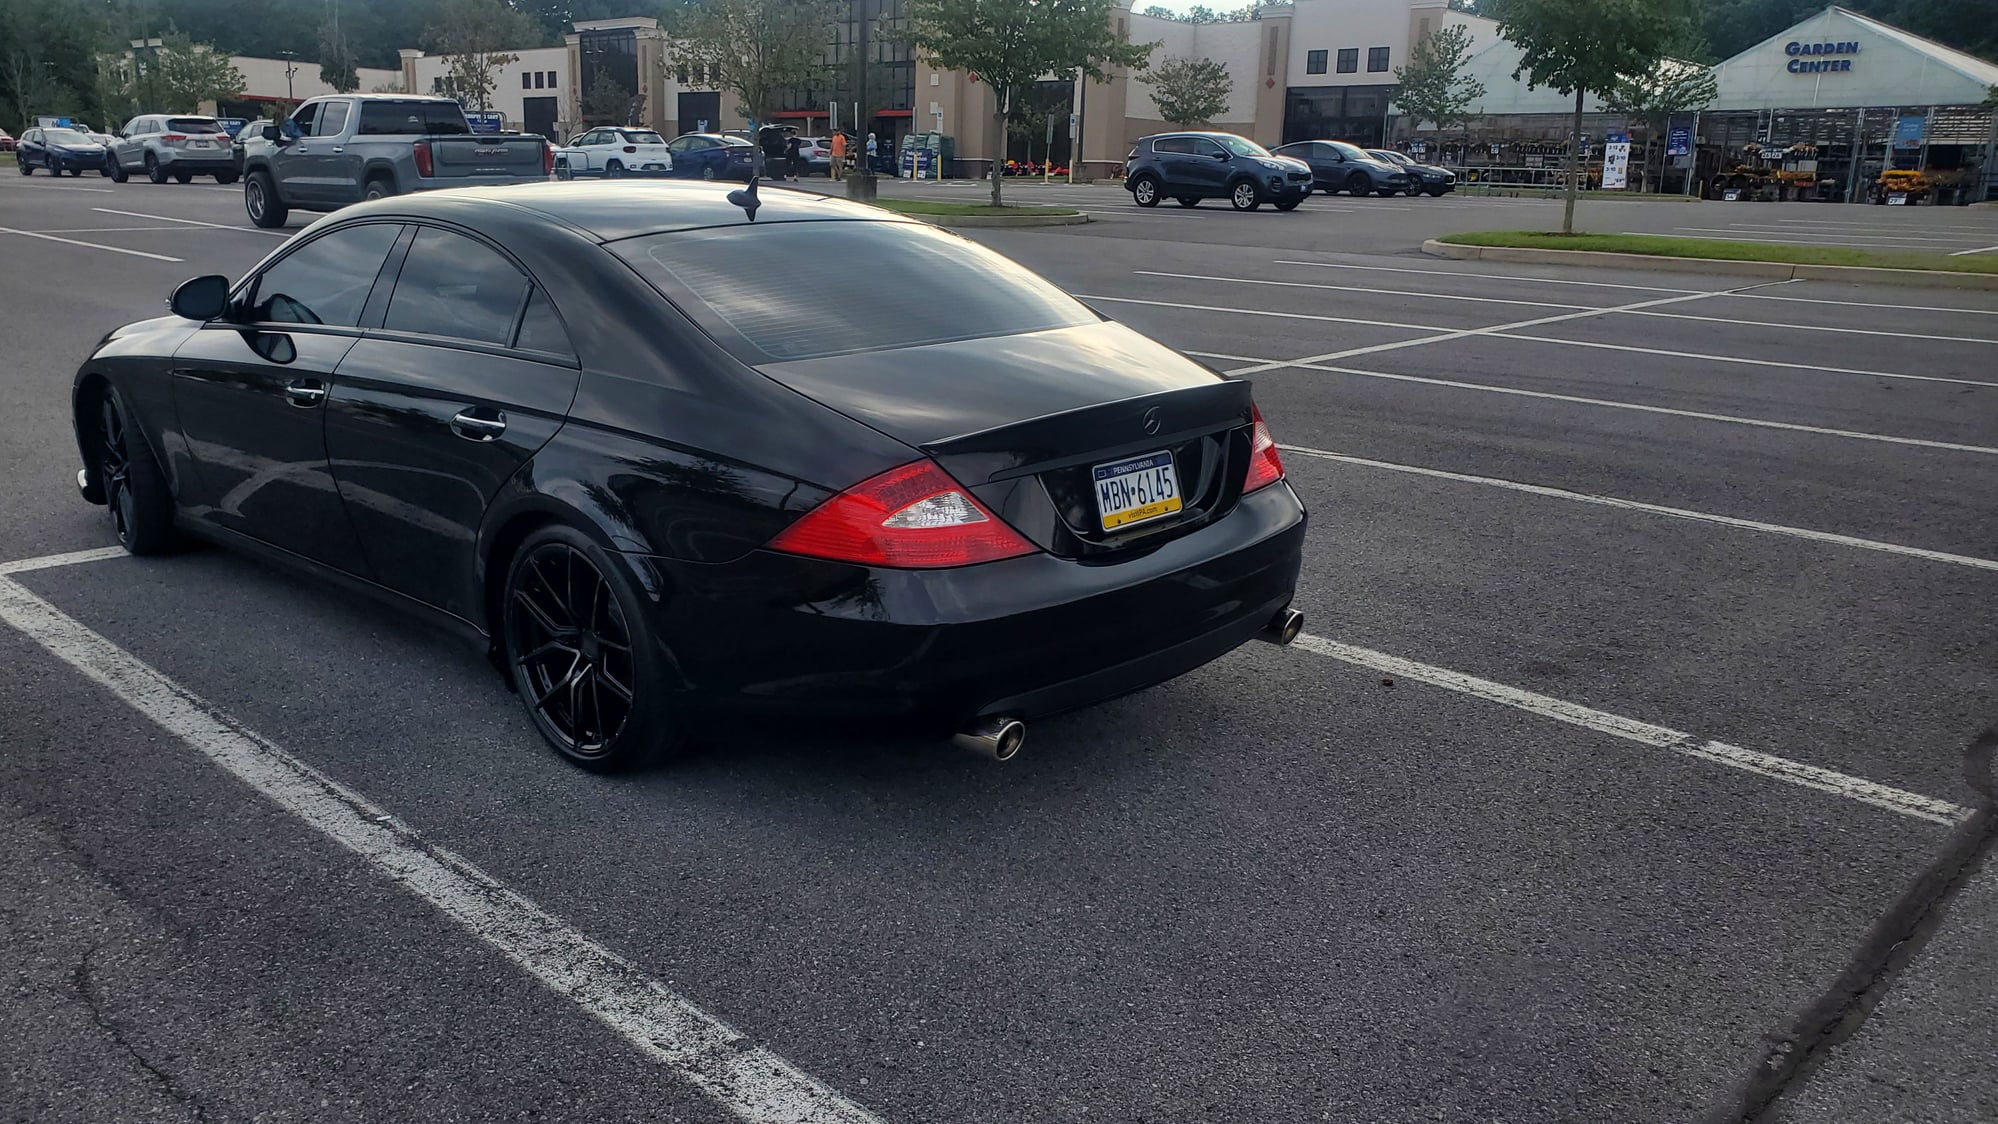 2007 Mercedes-Benz CLS550 - FS: Mercedes CLS550, $15k central PA - Used - VIN WDDDJ72XX7A082315 - 90,000 Miles - 8 cyl - 2WD - Automatic - Coupe - Black - State College, PA 16803, United States